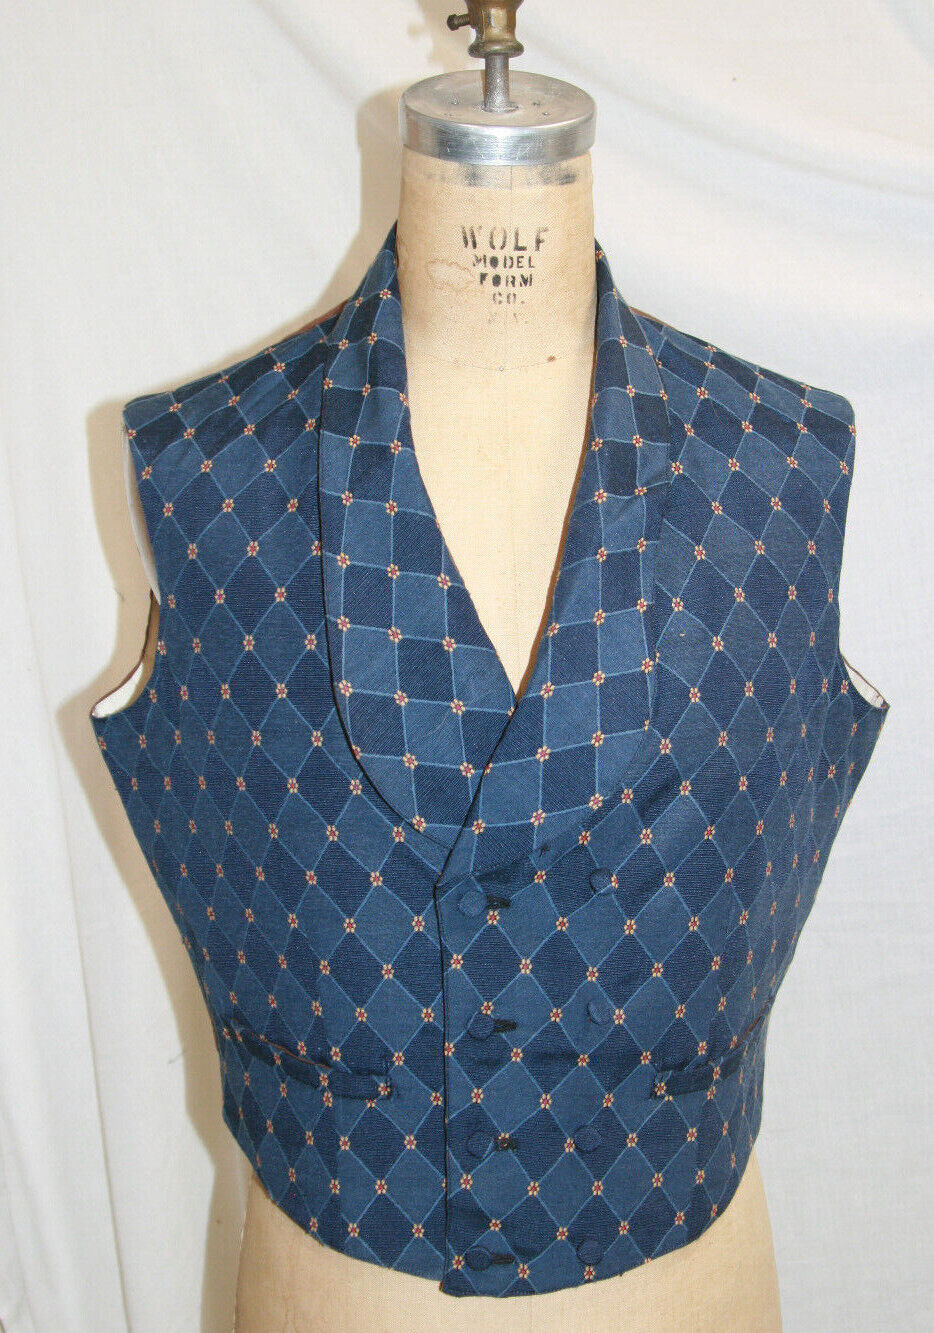 Double Breasted Vest size 44.